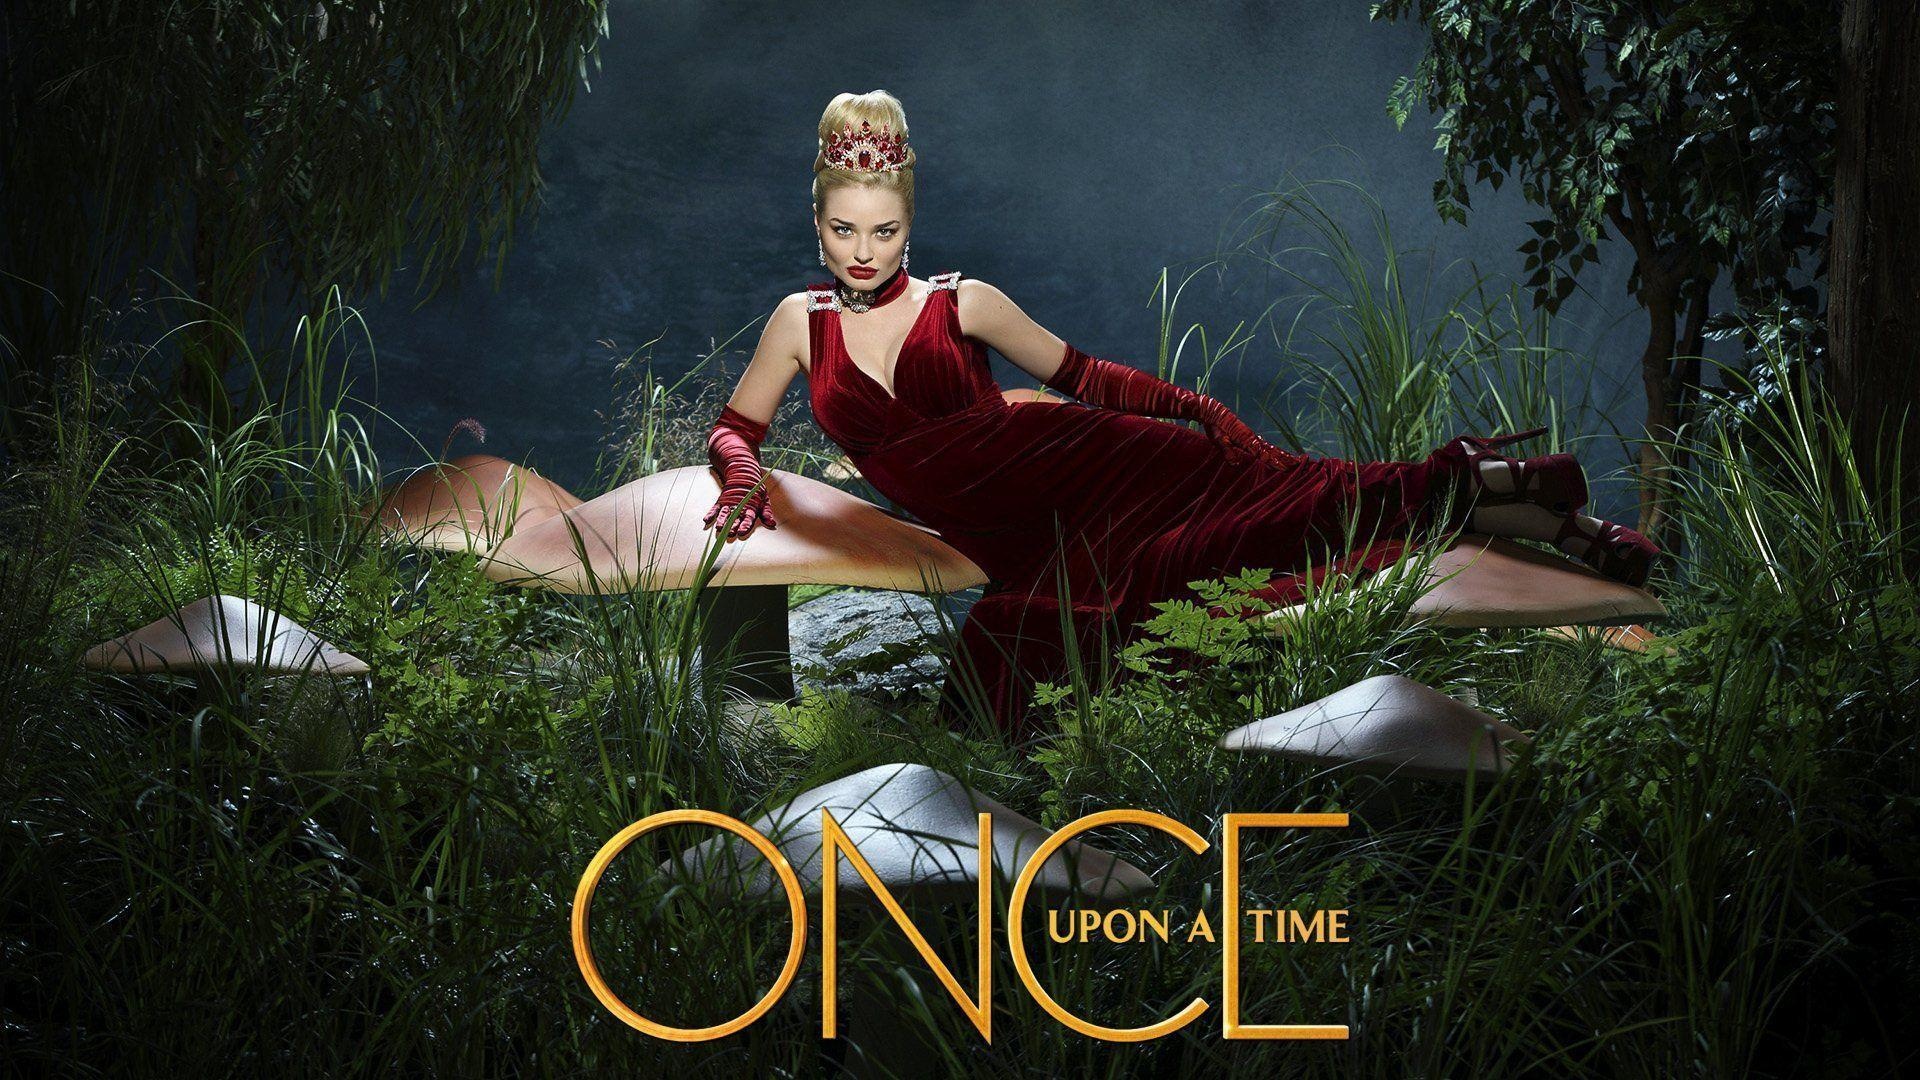 Once Upon a Time TV series, Free download wallpapers, Season 7 wallpapers, Stunning visuals, 1920x1080 Full HD Desktop